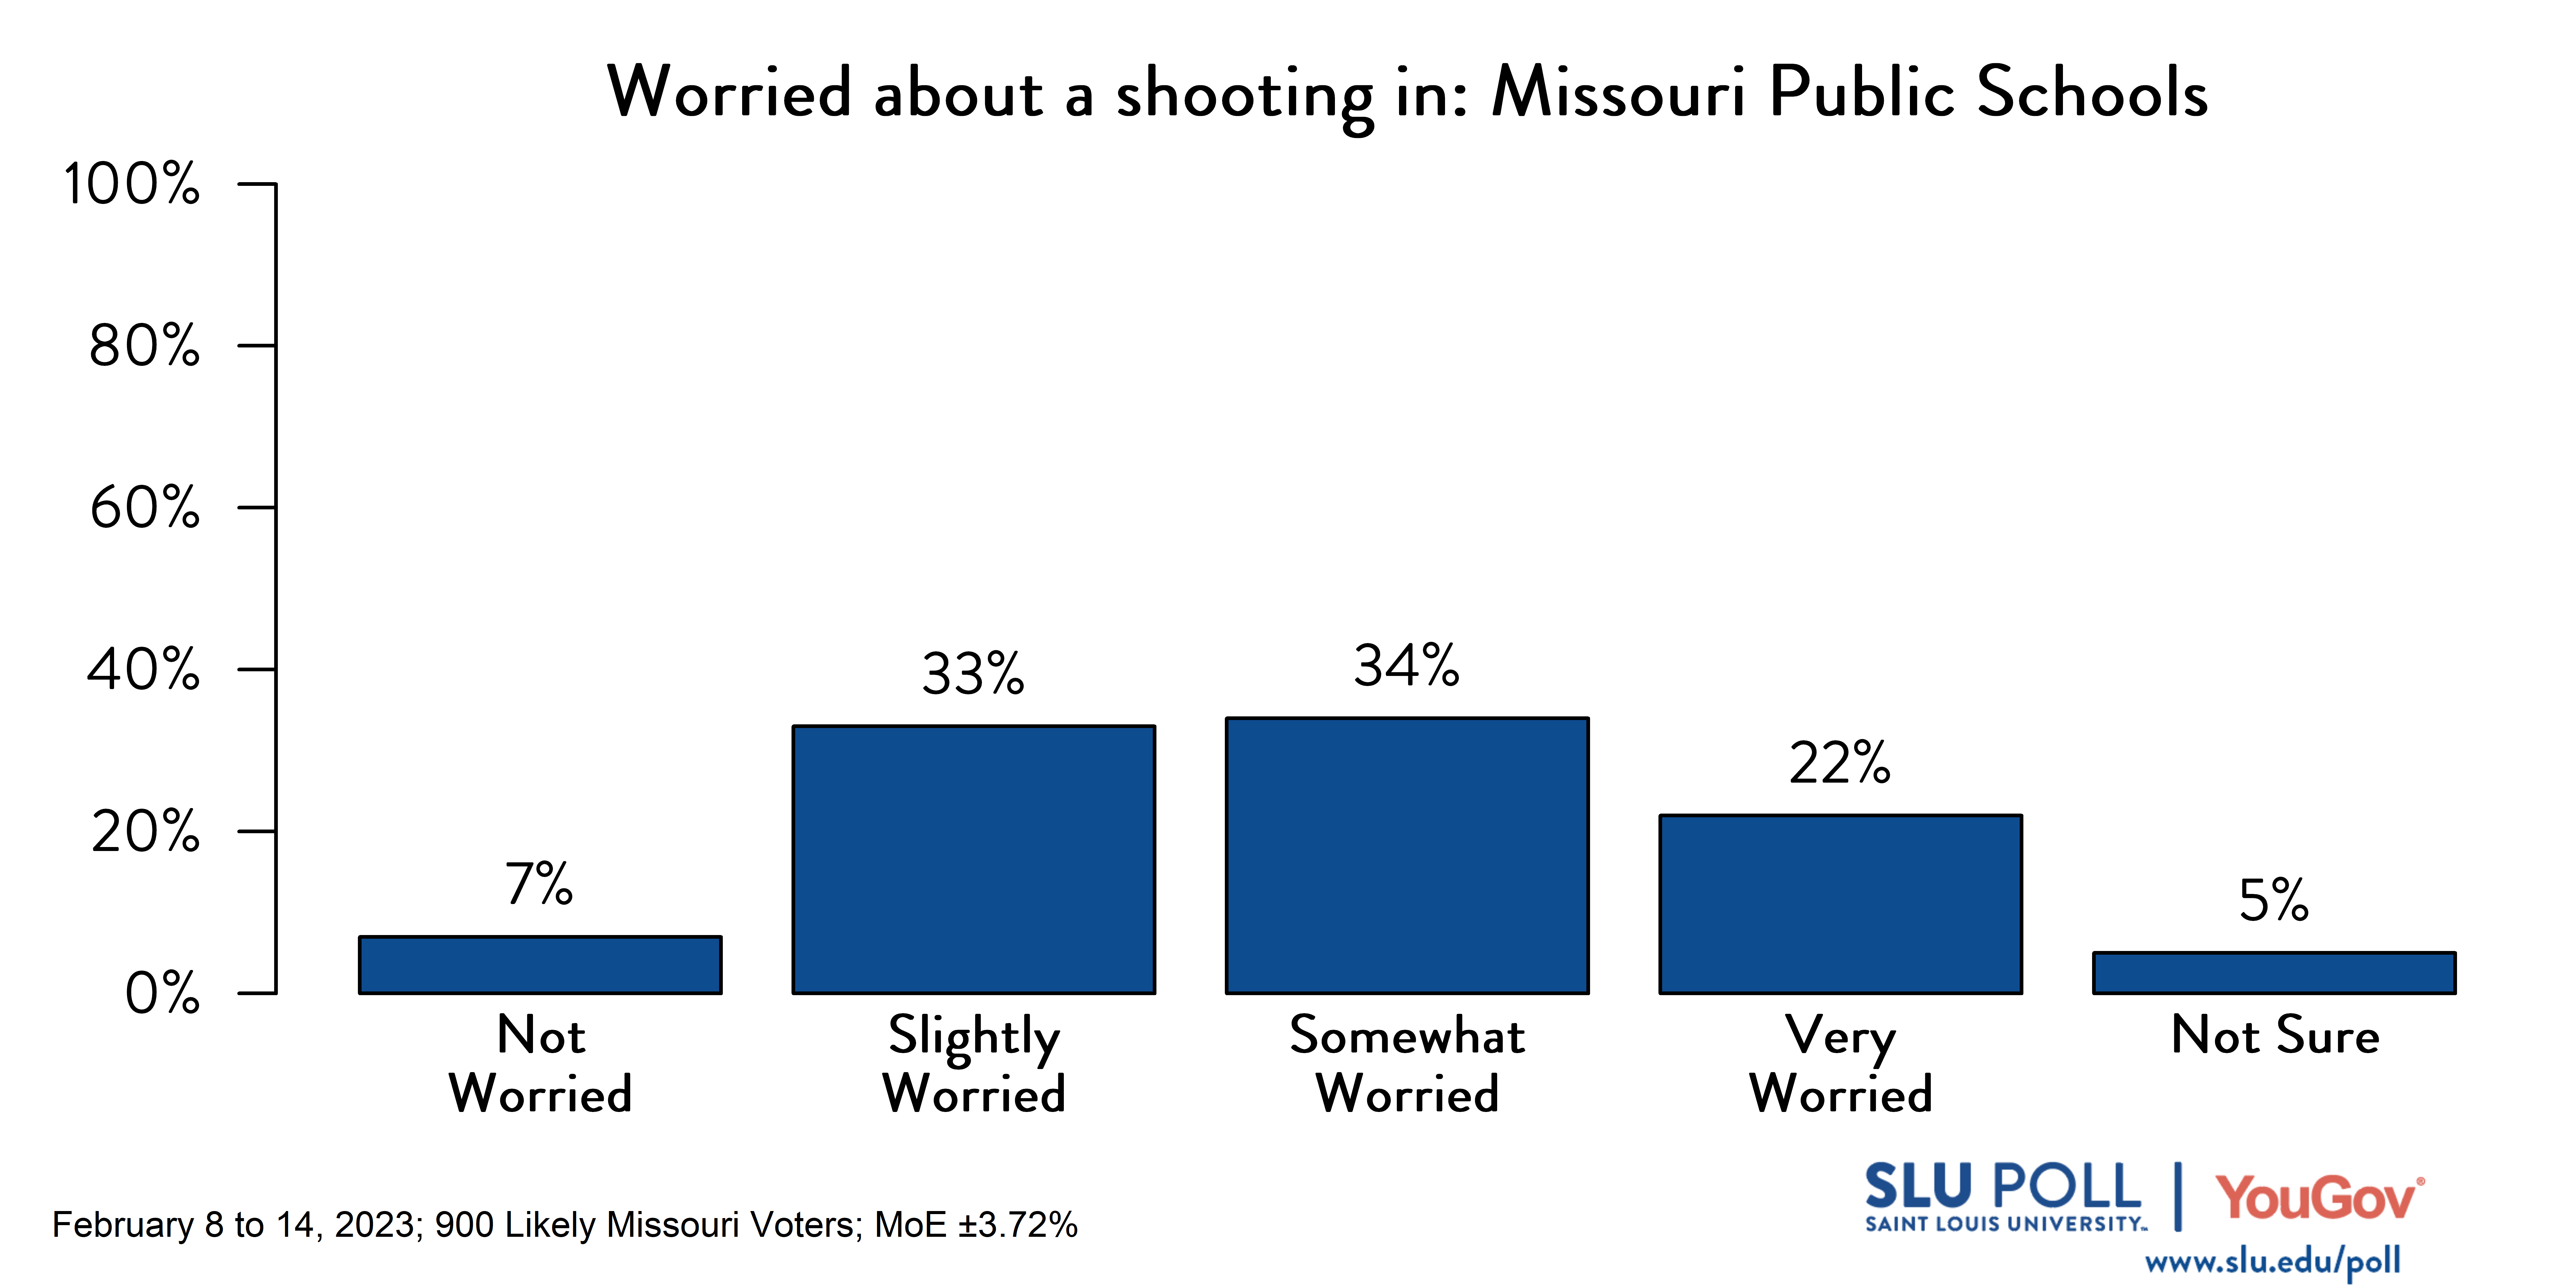 Likely voters' responses to 'How worried are you about the possibility of a shooting ever happening: in public schools across Missouri?': 7% Not worried, 33% Slightly worried, 34% Somewhat worried, 22% Very worried, and 5% Not sure.